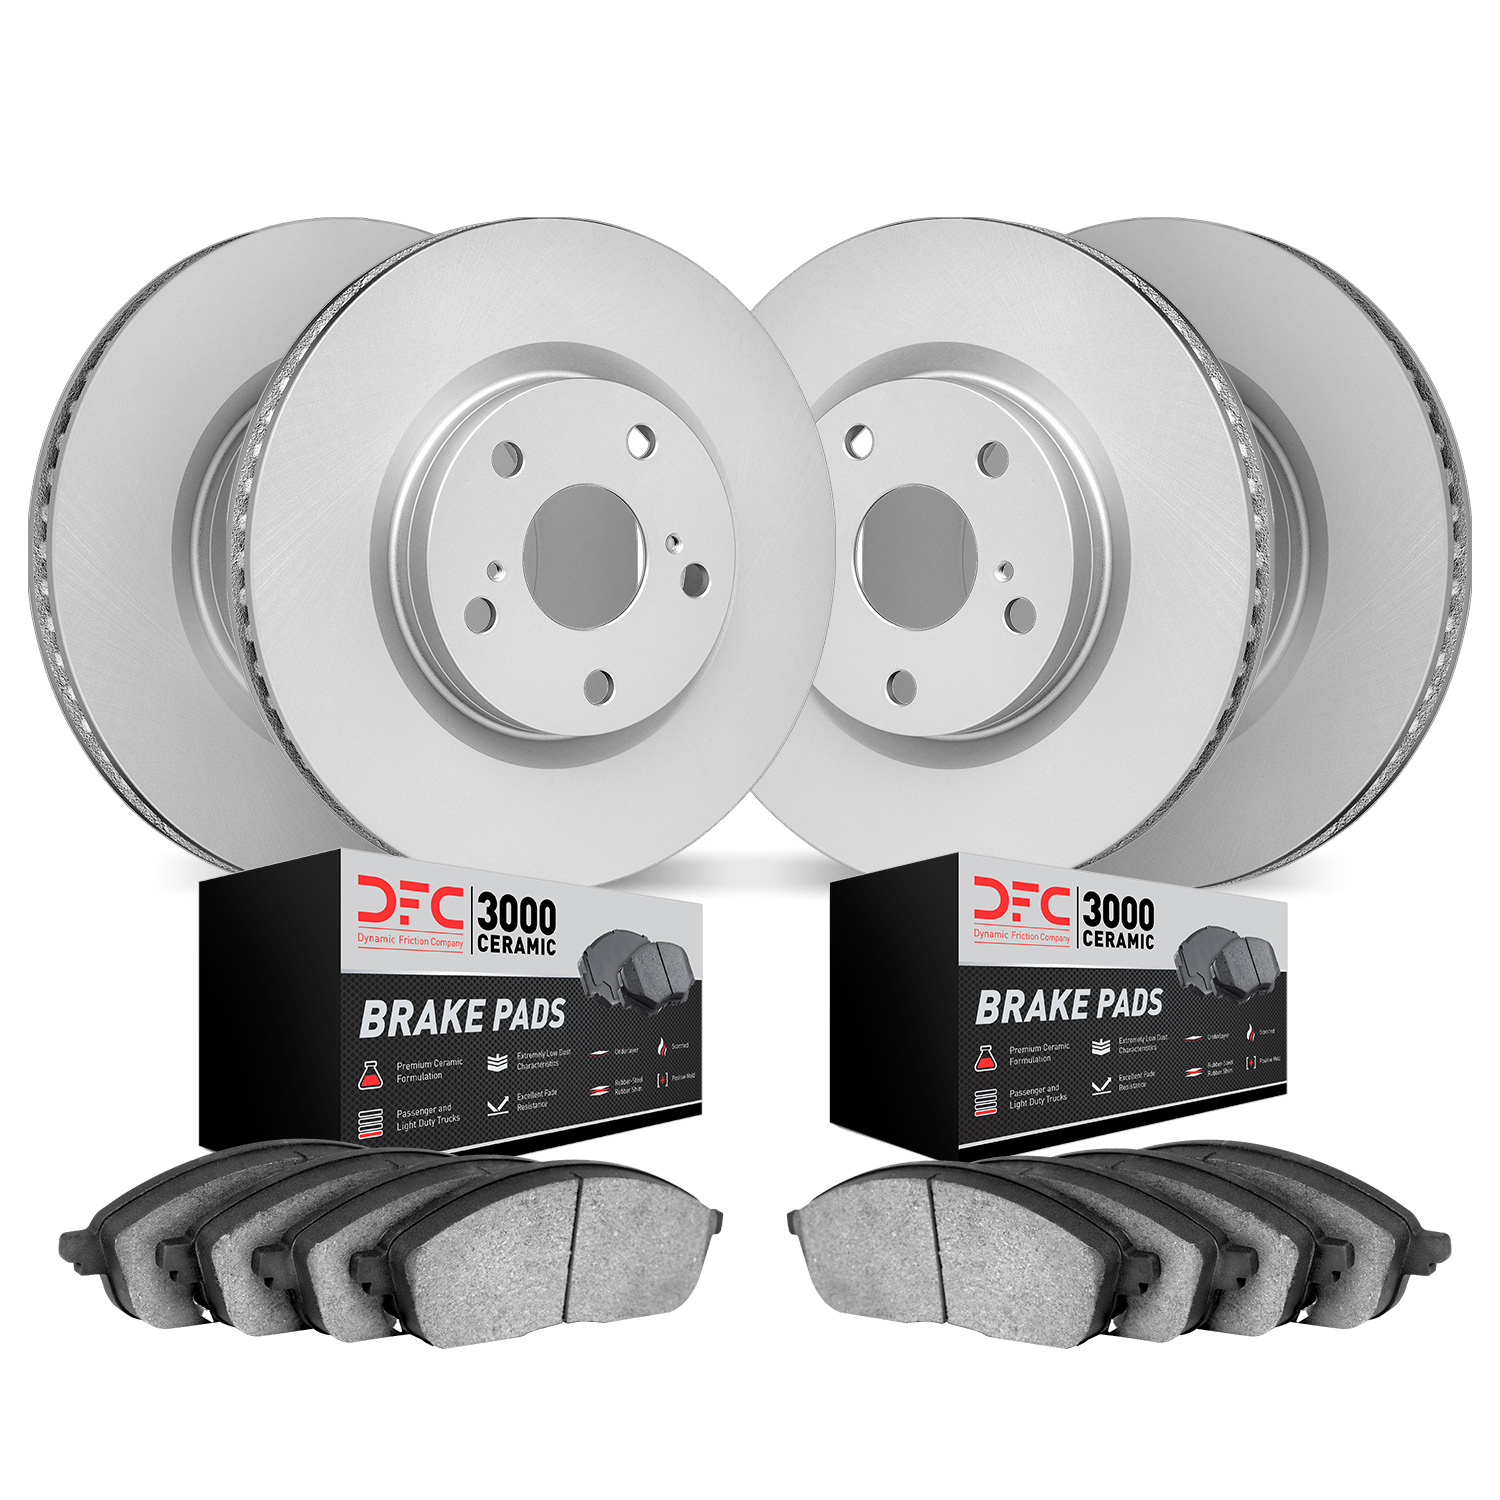 4304-67019 Geospec Brake Rotors with 3000-Series Ceramic Brake Pads Kit, 2009-2016 Renault, Position: Front and Rear